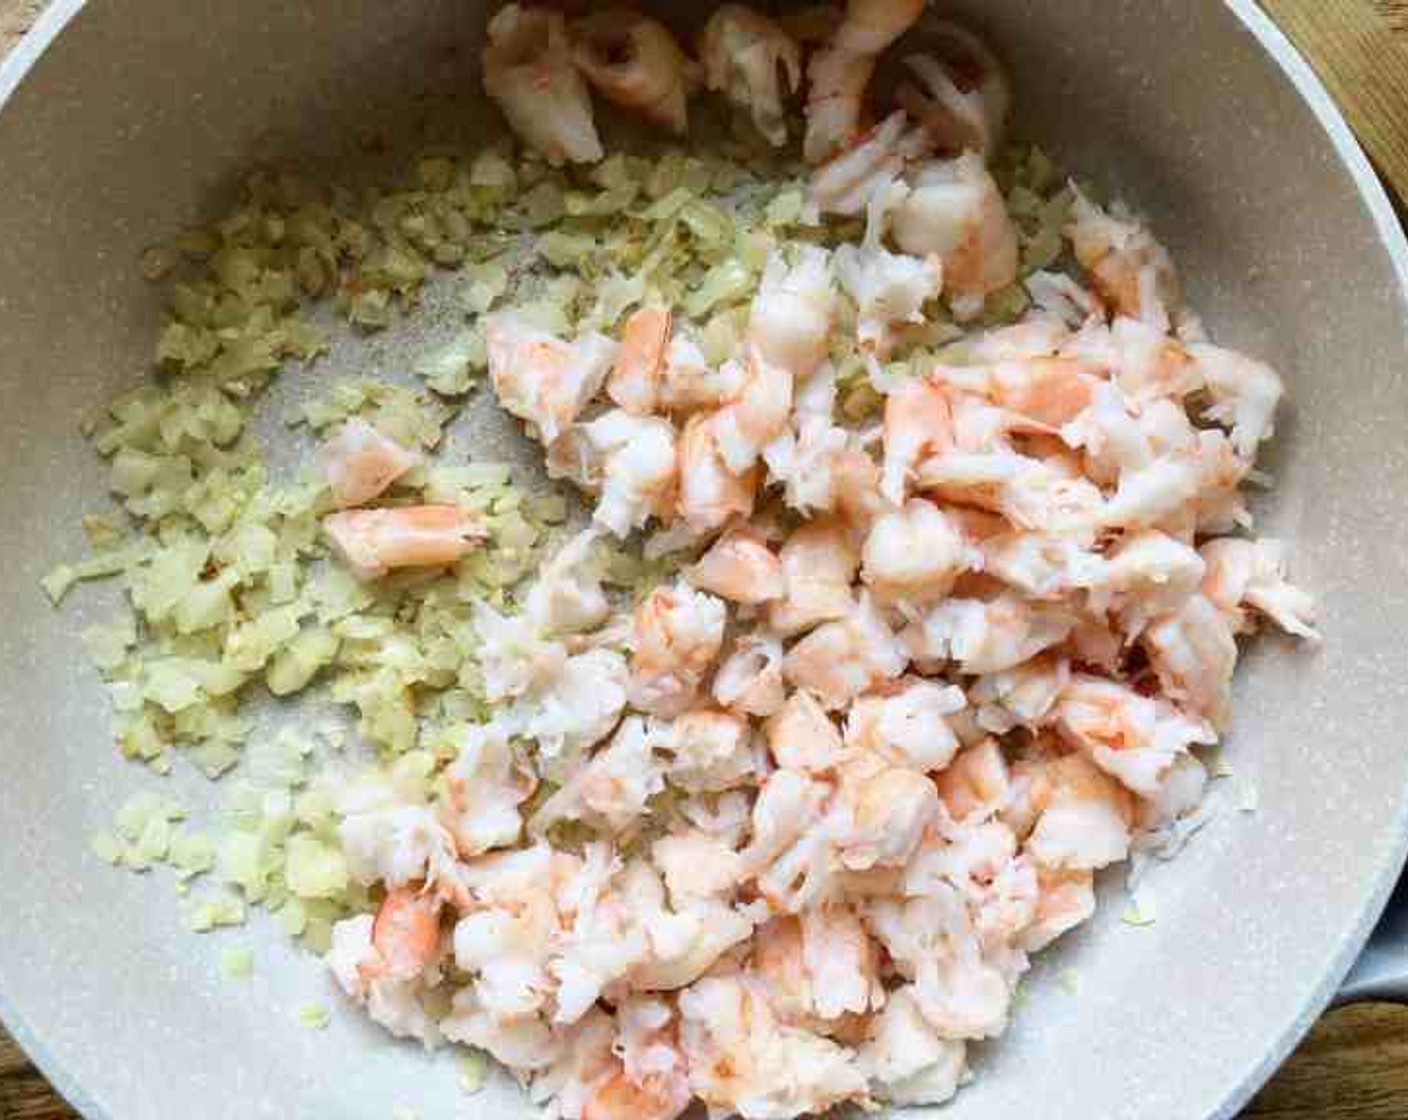 step 2 Add Cooked Shrimp (1 lb) and cook for 2 more minutes, stirring frequently. Remove the mixture from the pan, cover and keep warm.